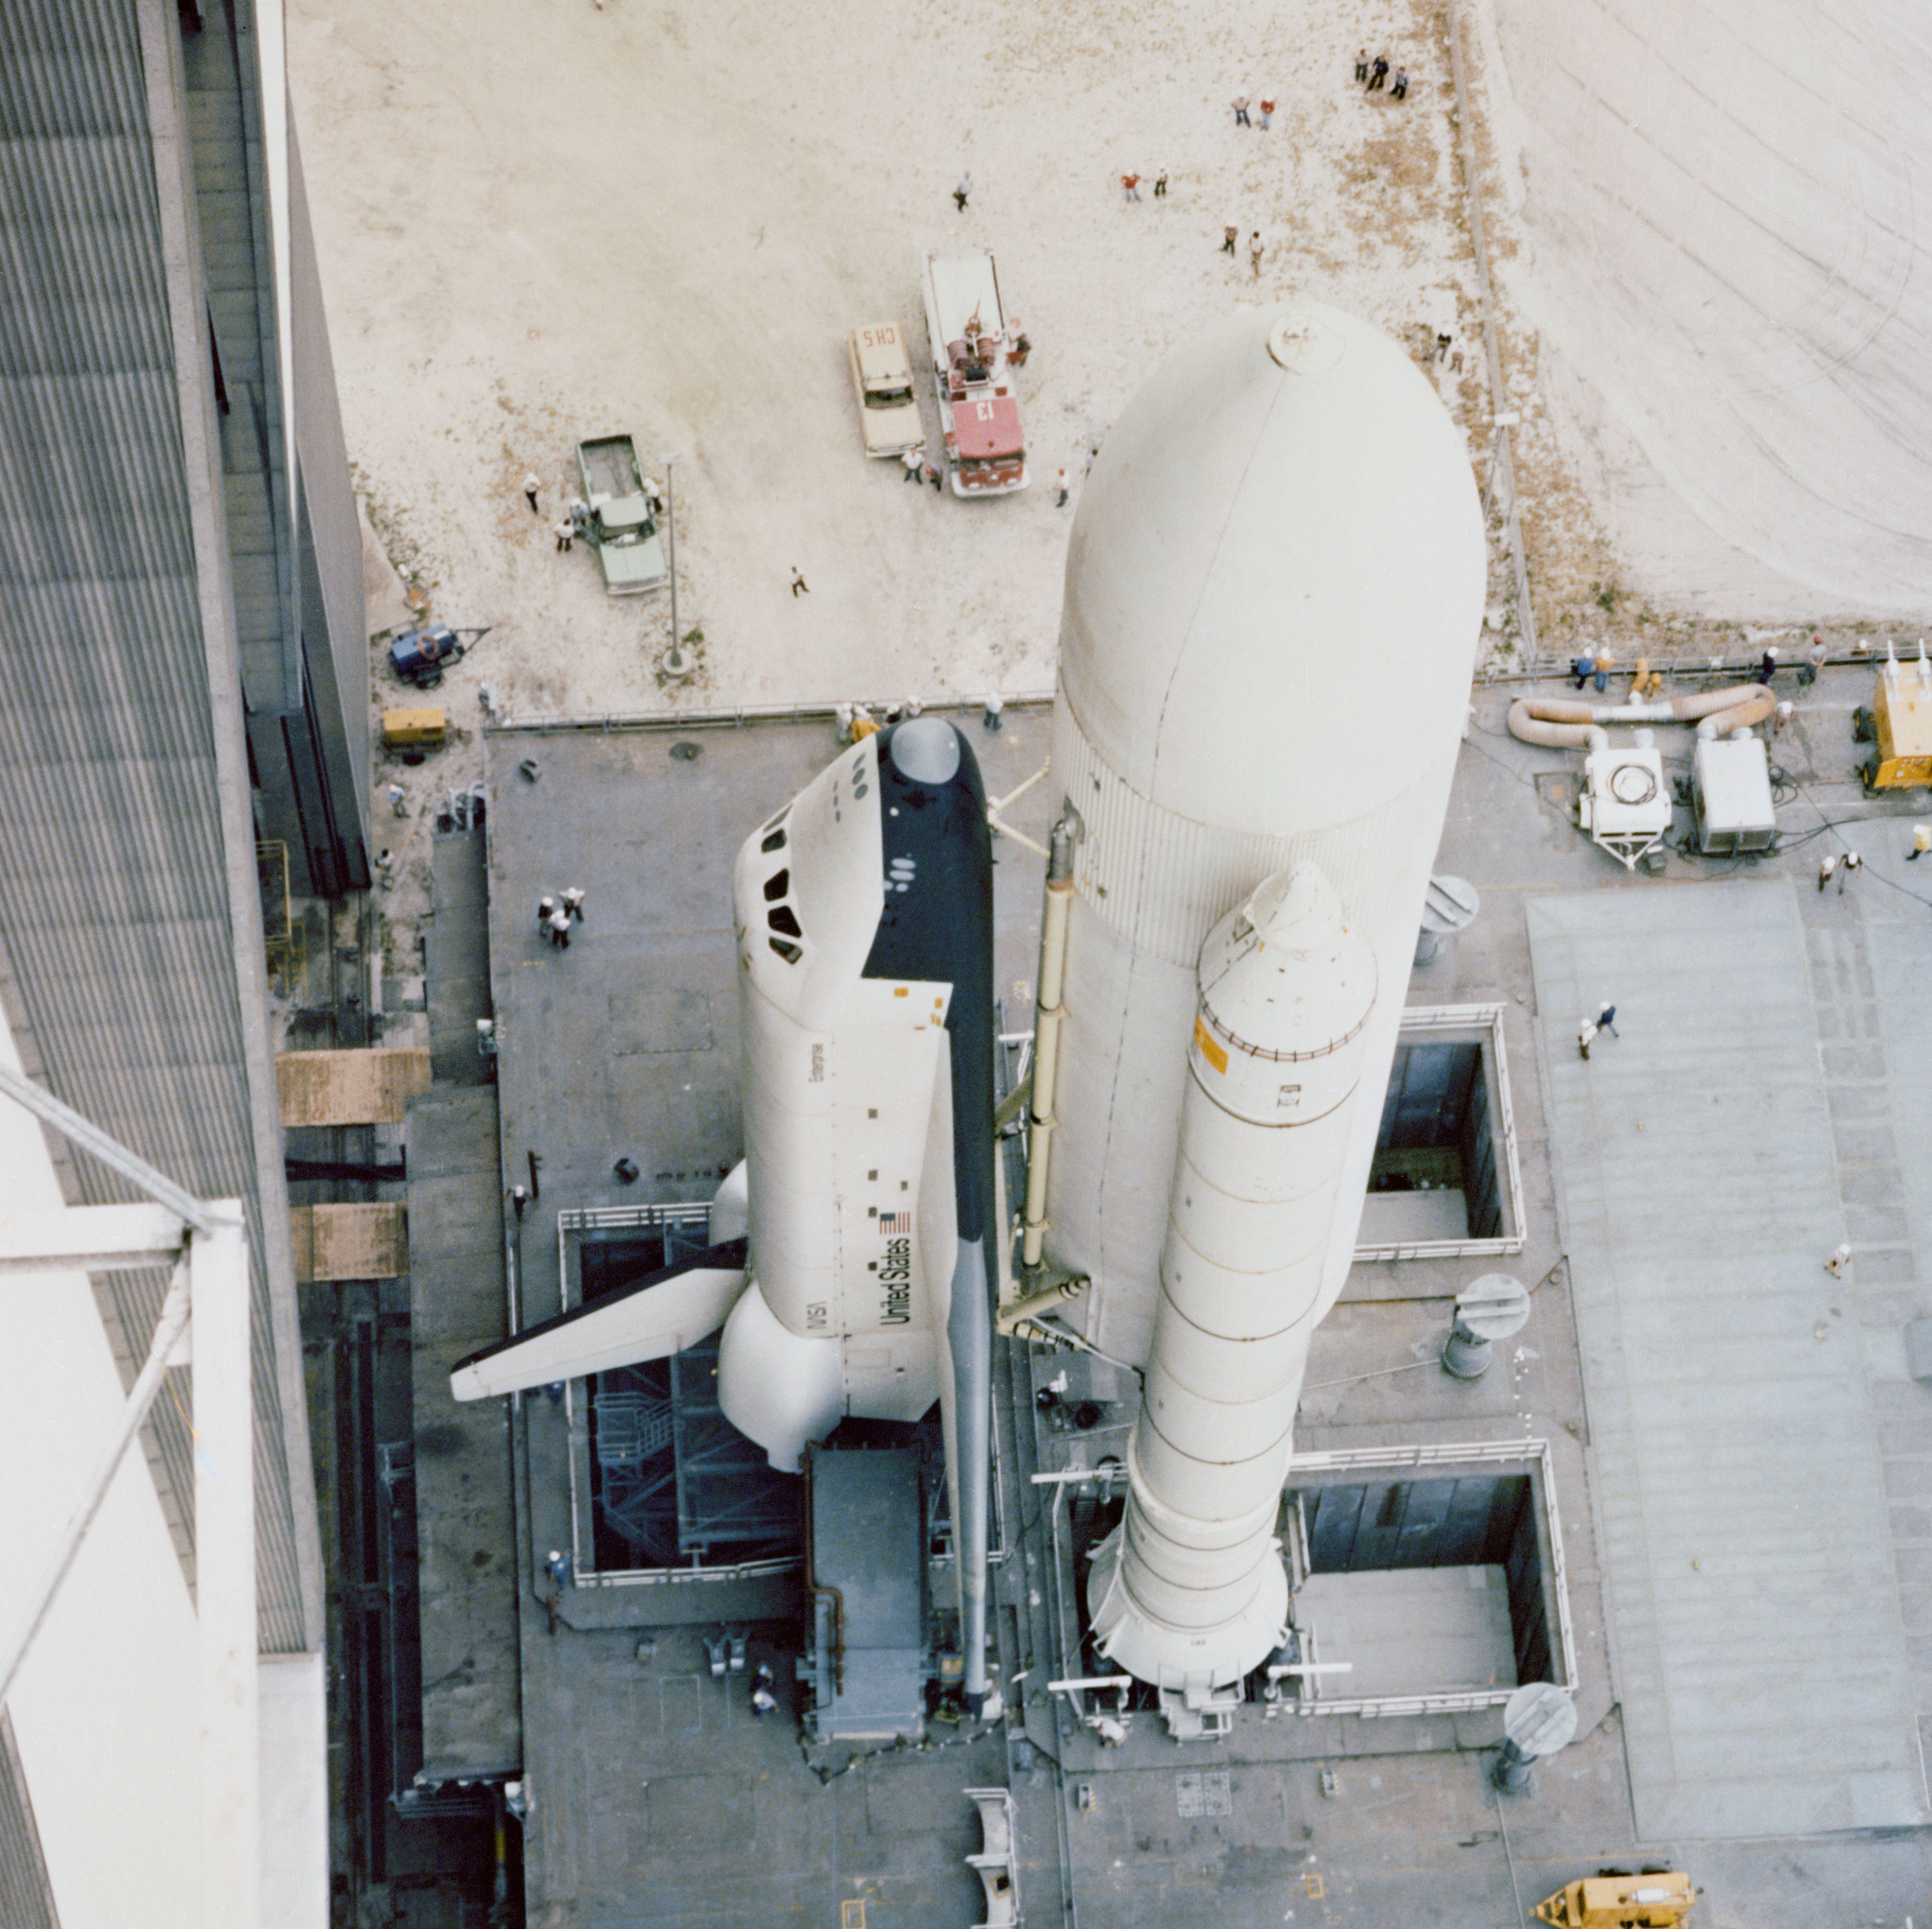 Enterprise exiting the Vehicle Assembly Building at NASA’s Kennedy Space Center in Florida